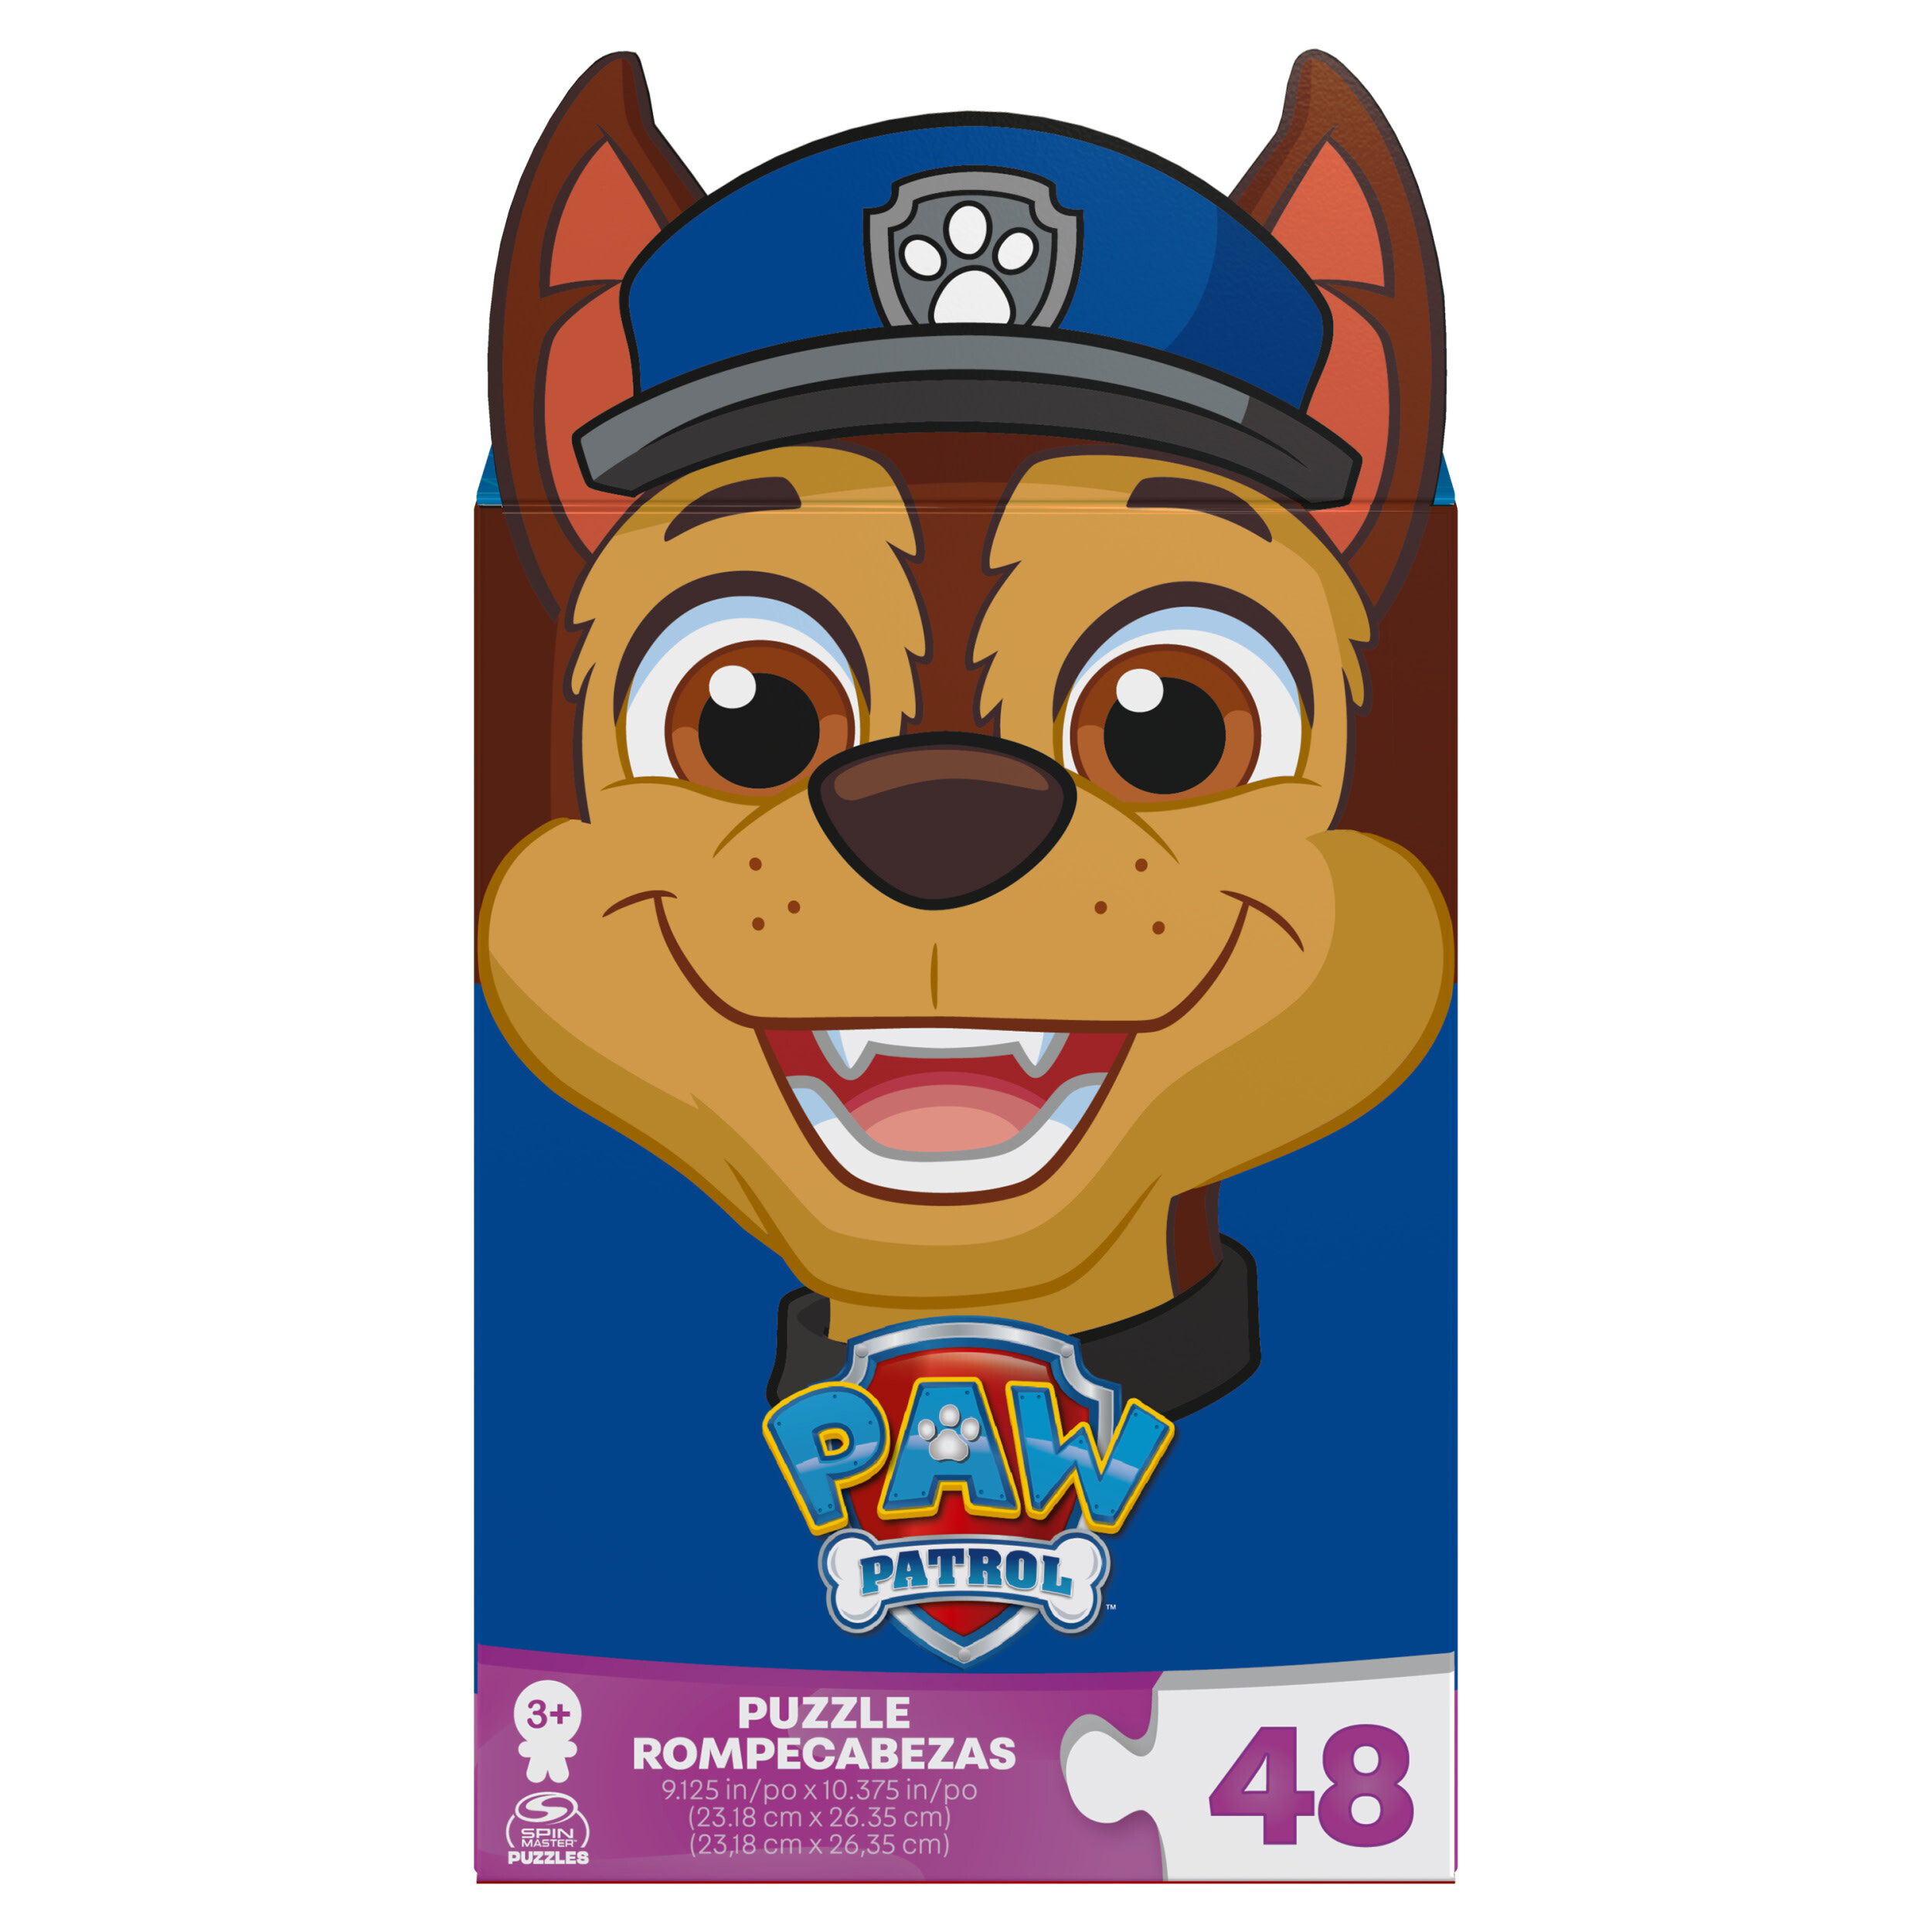 PAW Patrol 48-delige puzzel in schattige cadeauverpakking met oor Chase Marshall Skye Everest Rubble Ryder PAW Patrol-puzzels